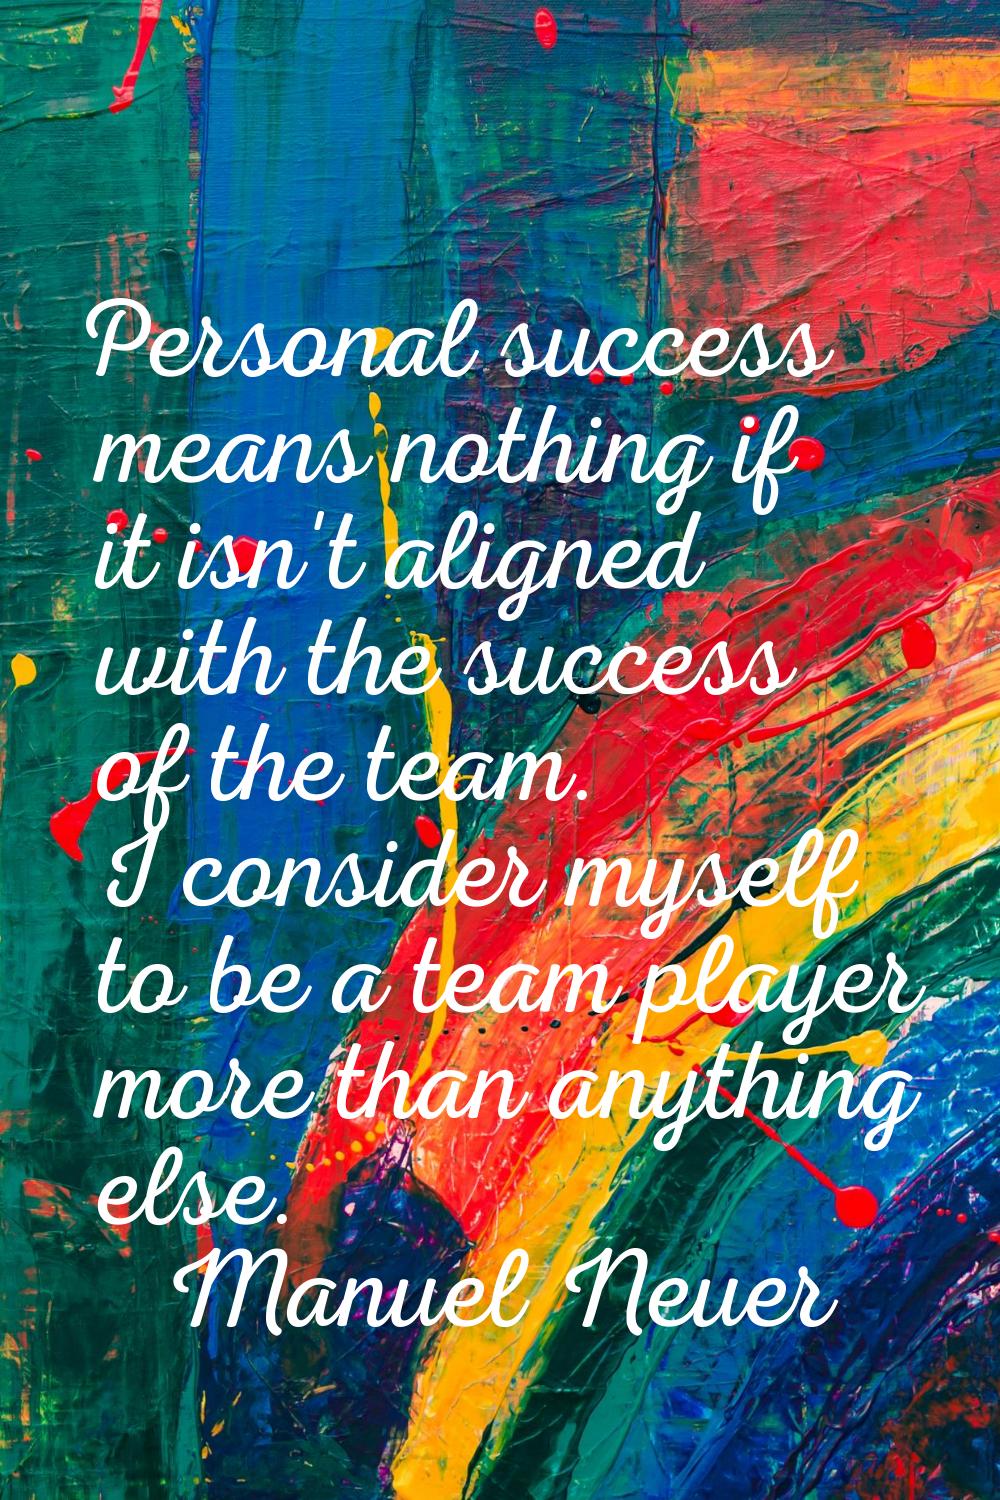 Personal success means nothing if it isn't aligned with the success of the team. I consider myself 